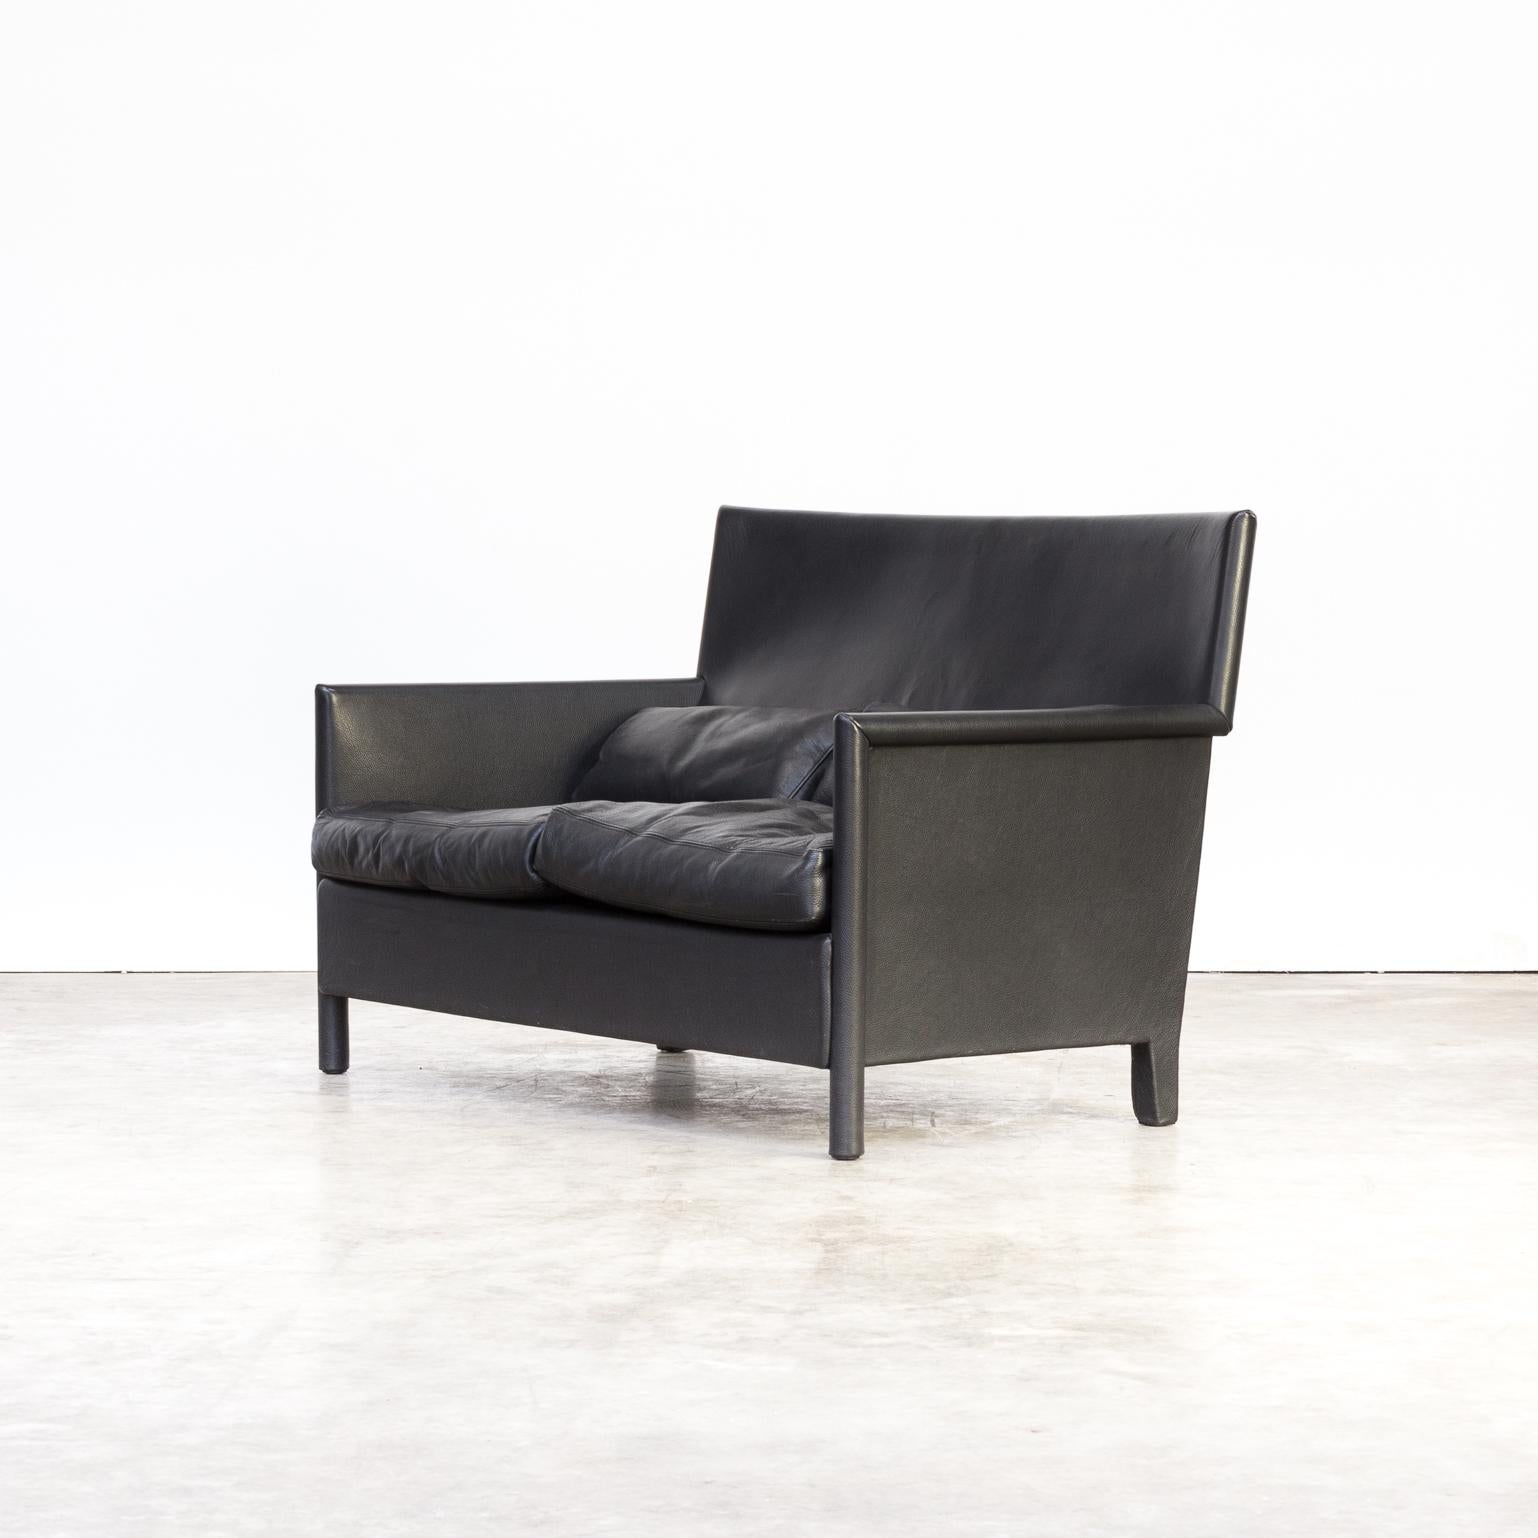 Highly comfortable double seat black leather sofa by the Italian workshop/studio Molteni & Co. The frame of the sofa has been wrapped in leather and the armleggers are in small though comfortable rounded leather. Beautiful detailed design. Good